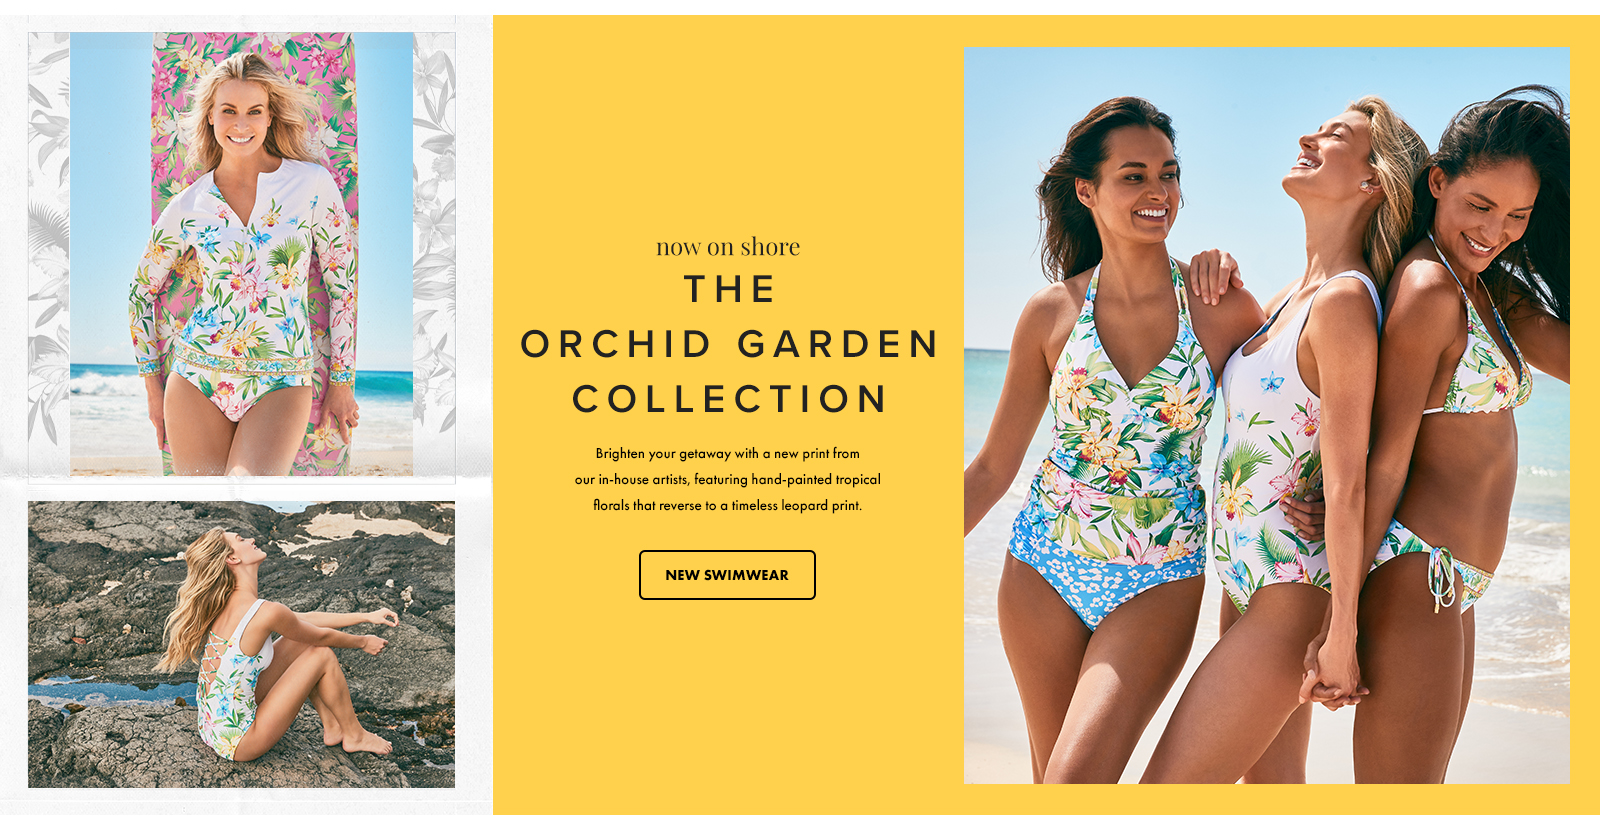 THE ORCHID GARDEN COLLECTION: Brighten your getaway with a new print from our in-house artists, featuring hand-painted tropical florals that reverse to a timeless leopard print.